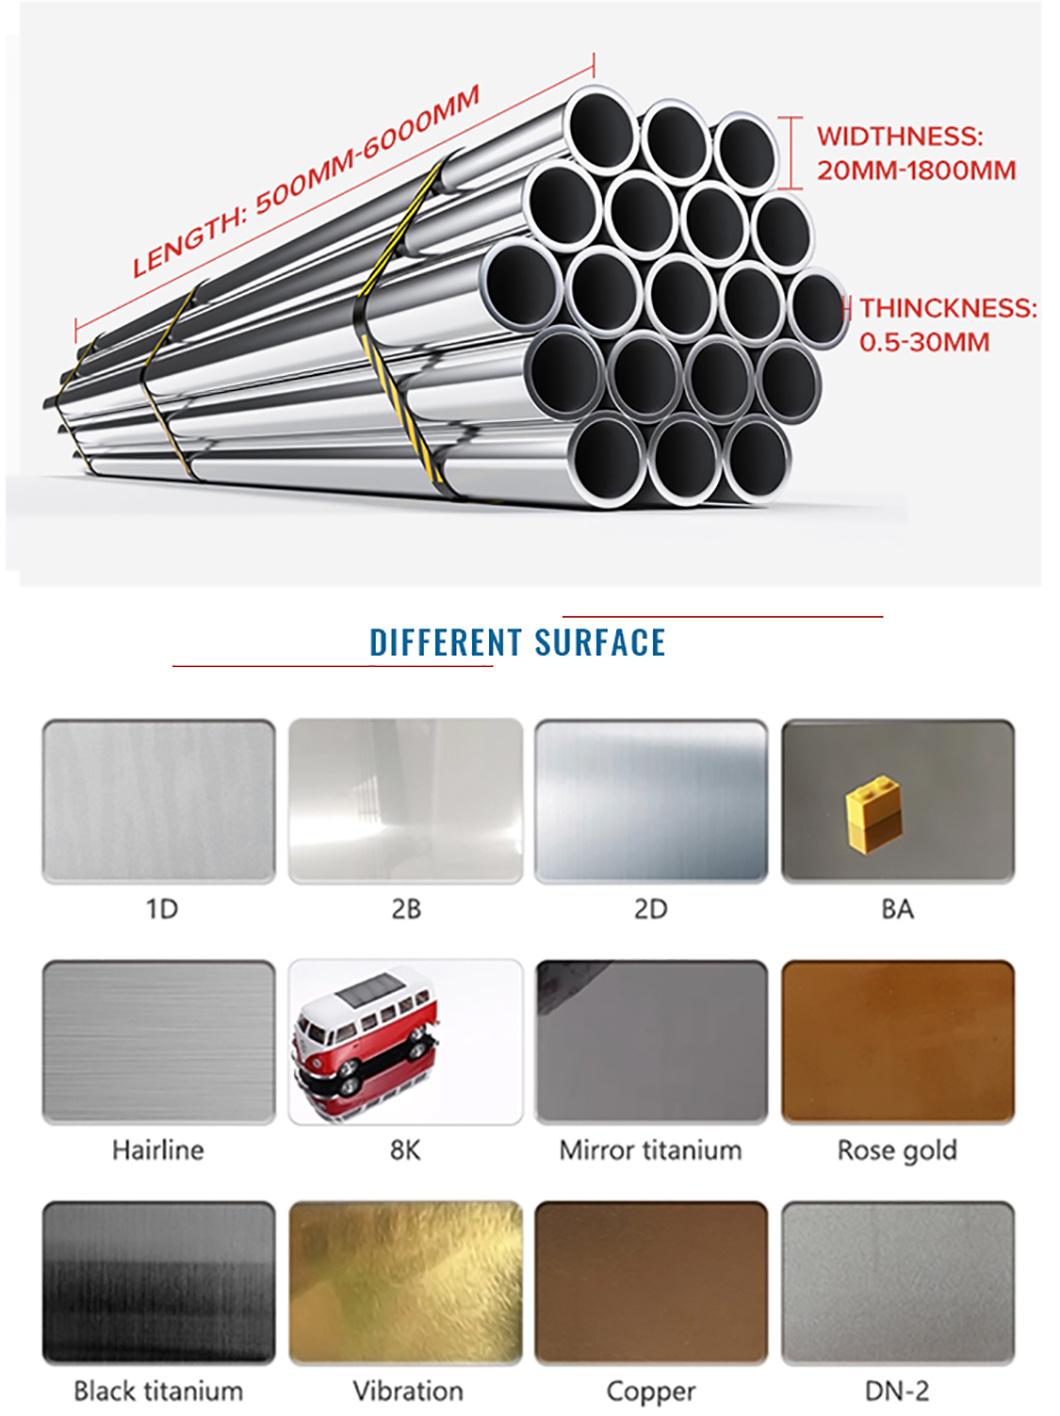 Ss201 Tp201 Square Polishing Pickling Stainless Steel Pipe